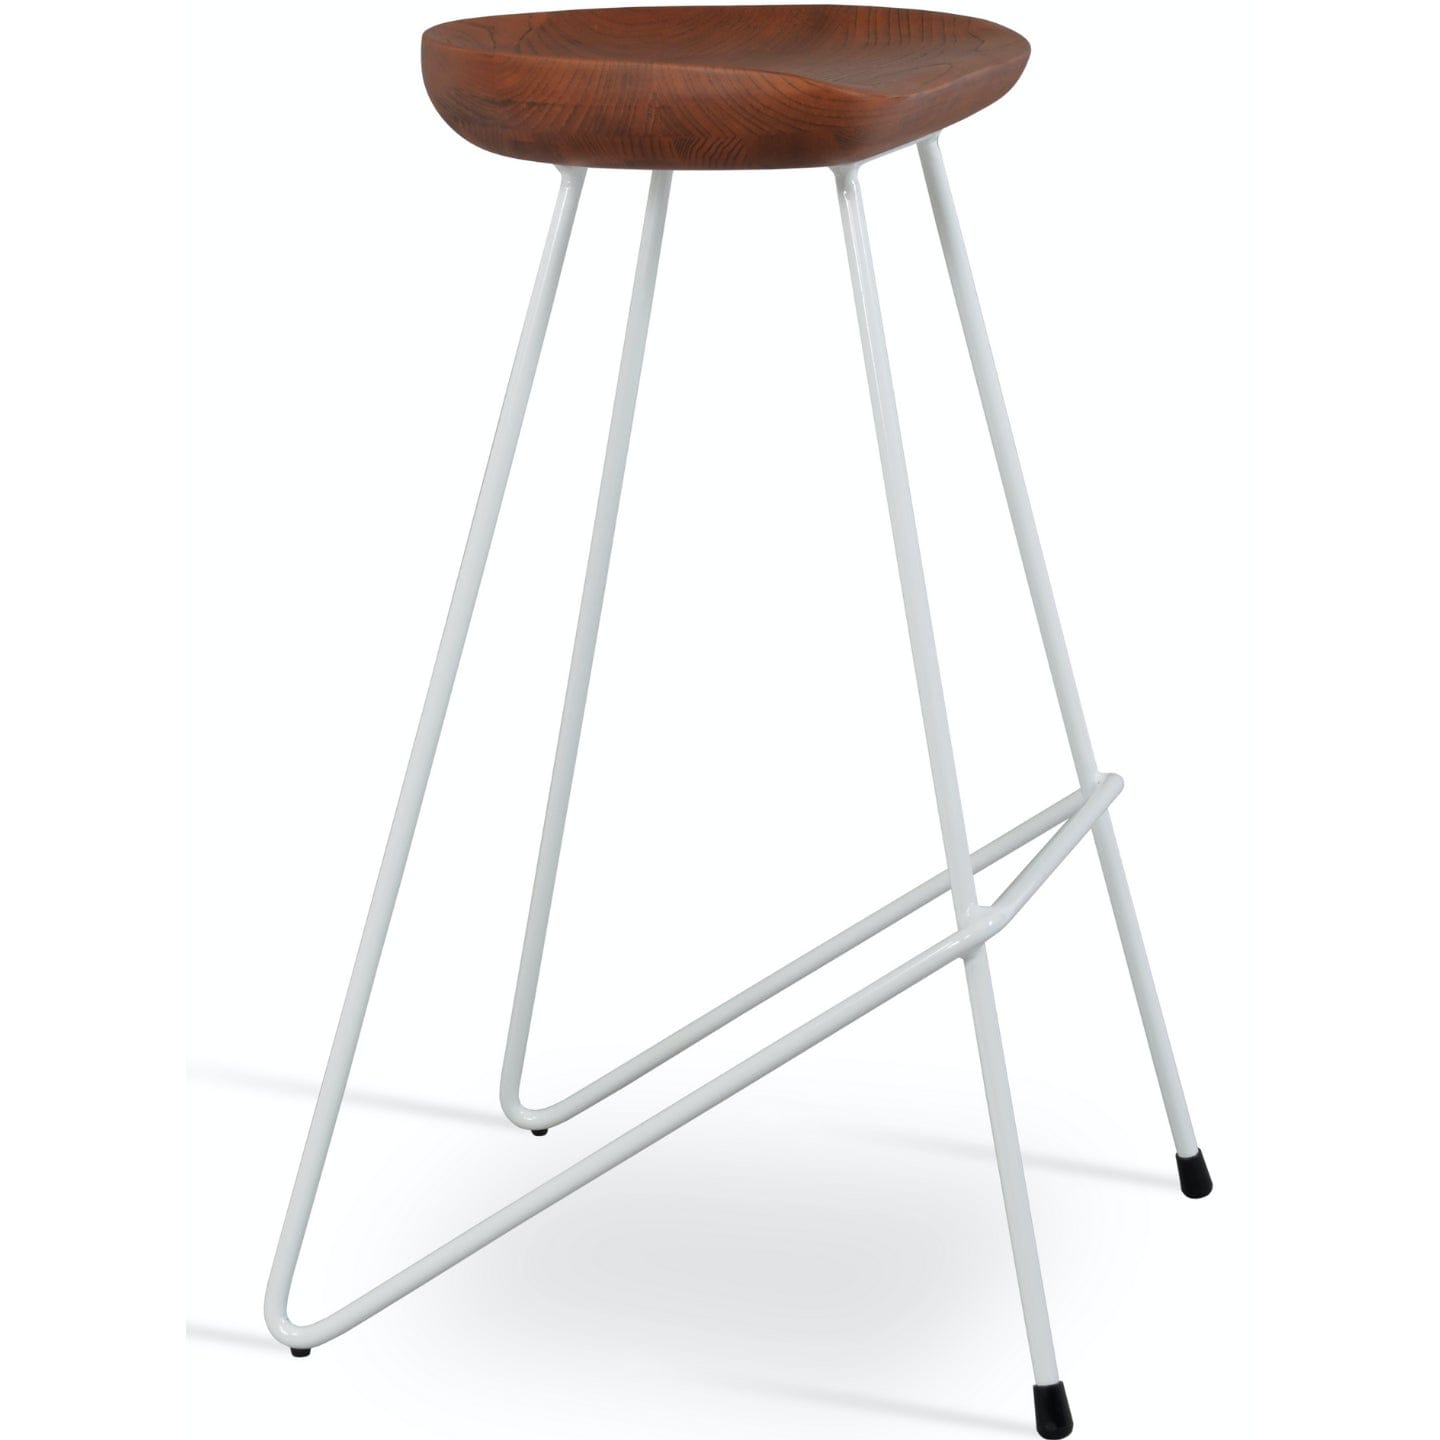 Soho Concept cattelan-industrial-white-metal-wire-base-wood-seat-kitchen-stool-in-antique